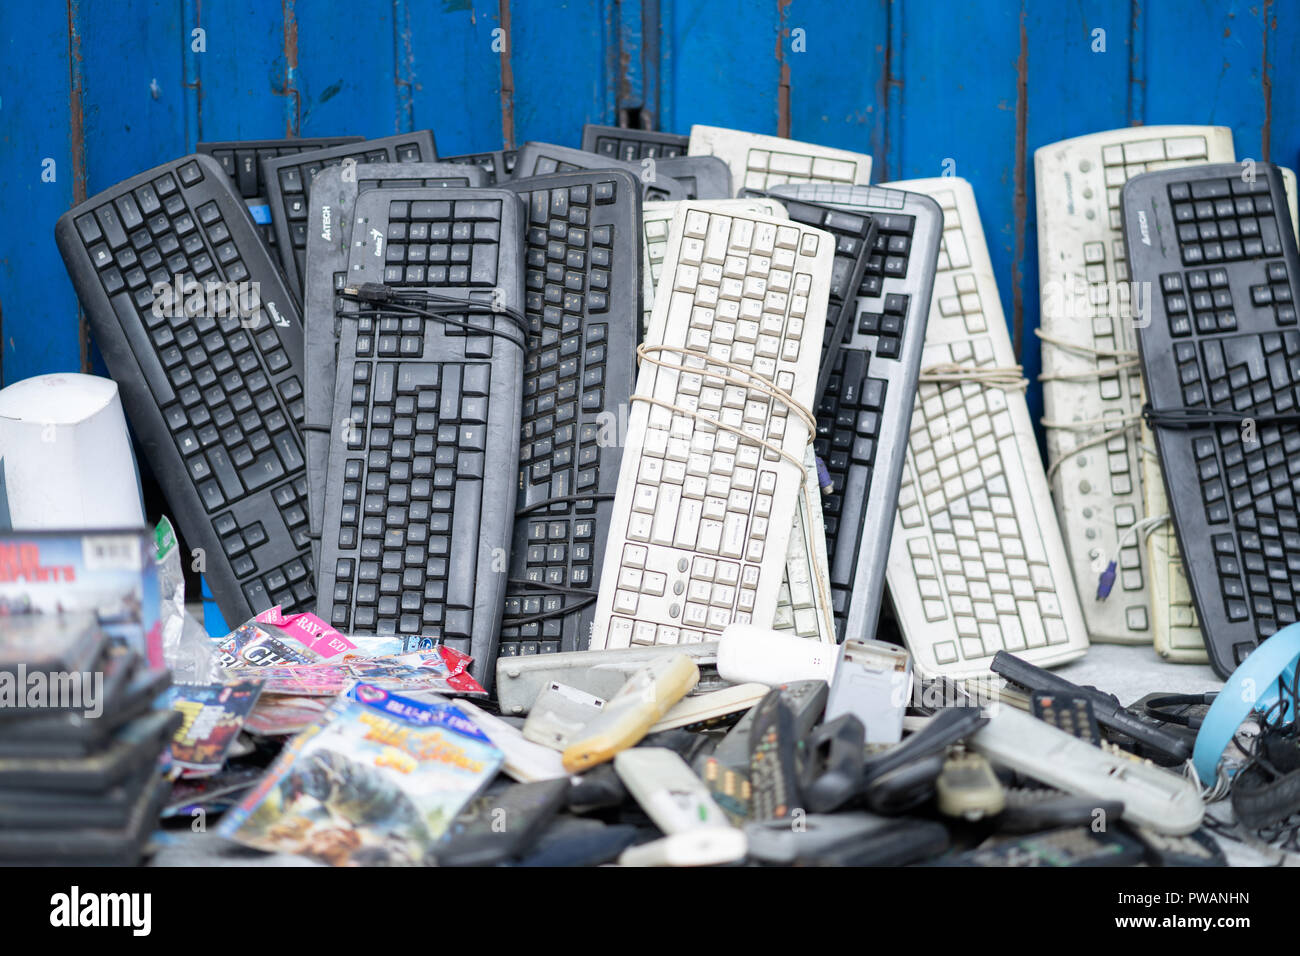 Old electronic keyboards for sale on a sidewalk,Cebu City,Phiulippines Stock Photo